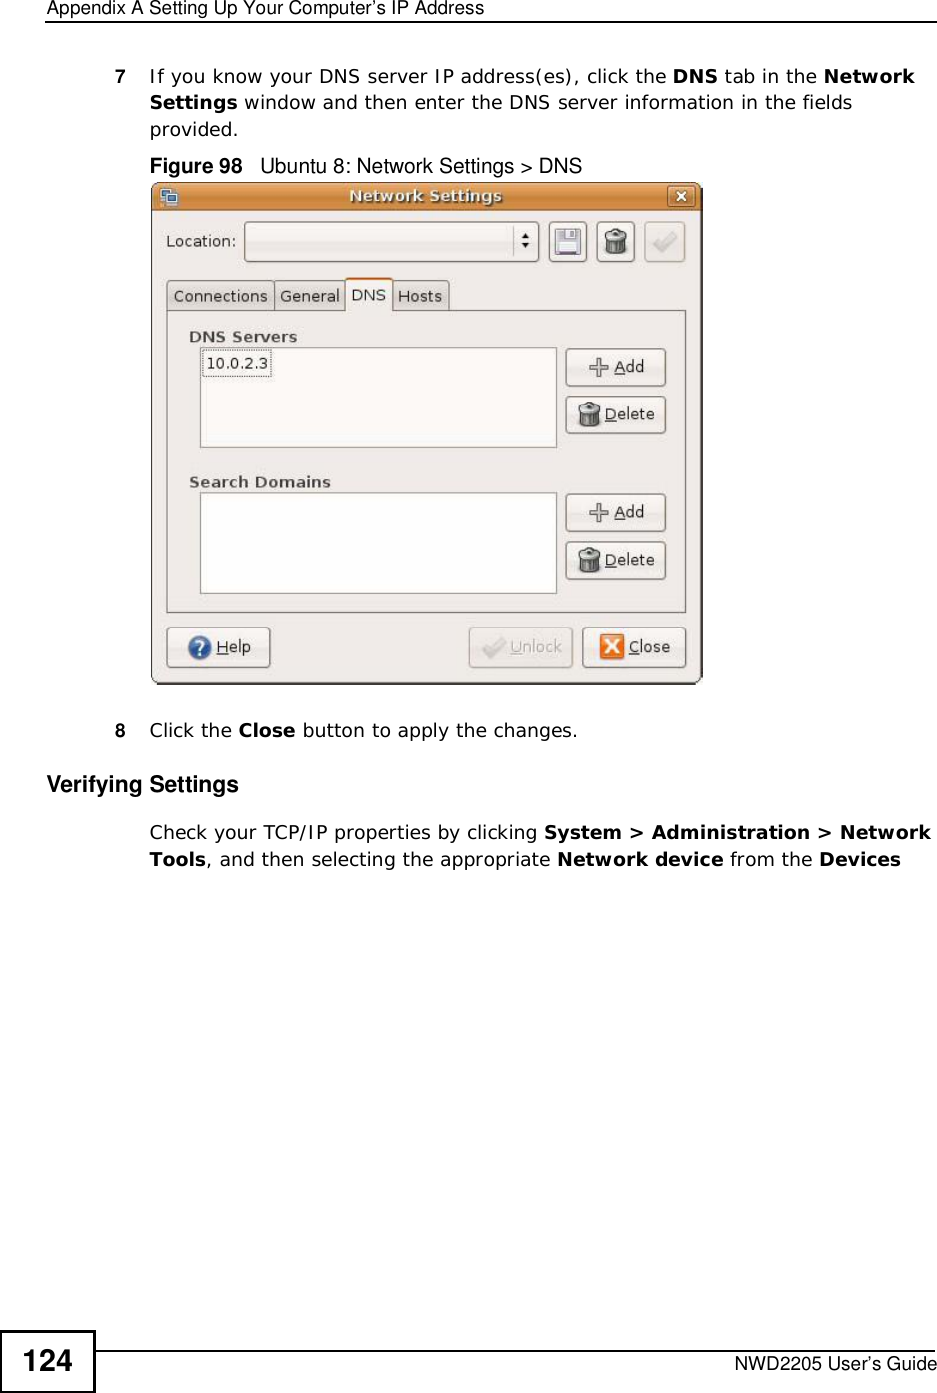 Appendix ASetting Up Your Computer’s IP AddressNWD2205 User’s Guide1247If you know your DNS server IP address(es), click the DNS tab in the Network Settings window and then enter the DNS server information in the fields provided. Figure 98   Ubuntu 8: Network Settings &gt; DNS  8Click the Close button to apply the changes.Verifying SettingsCheck your TCP/IP properties by clicking System &gt; Administration &gt; Network Tools, and then selecting the appropriate Network device from the Devices